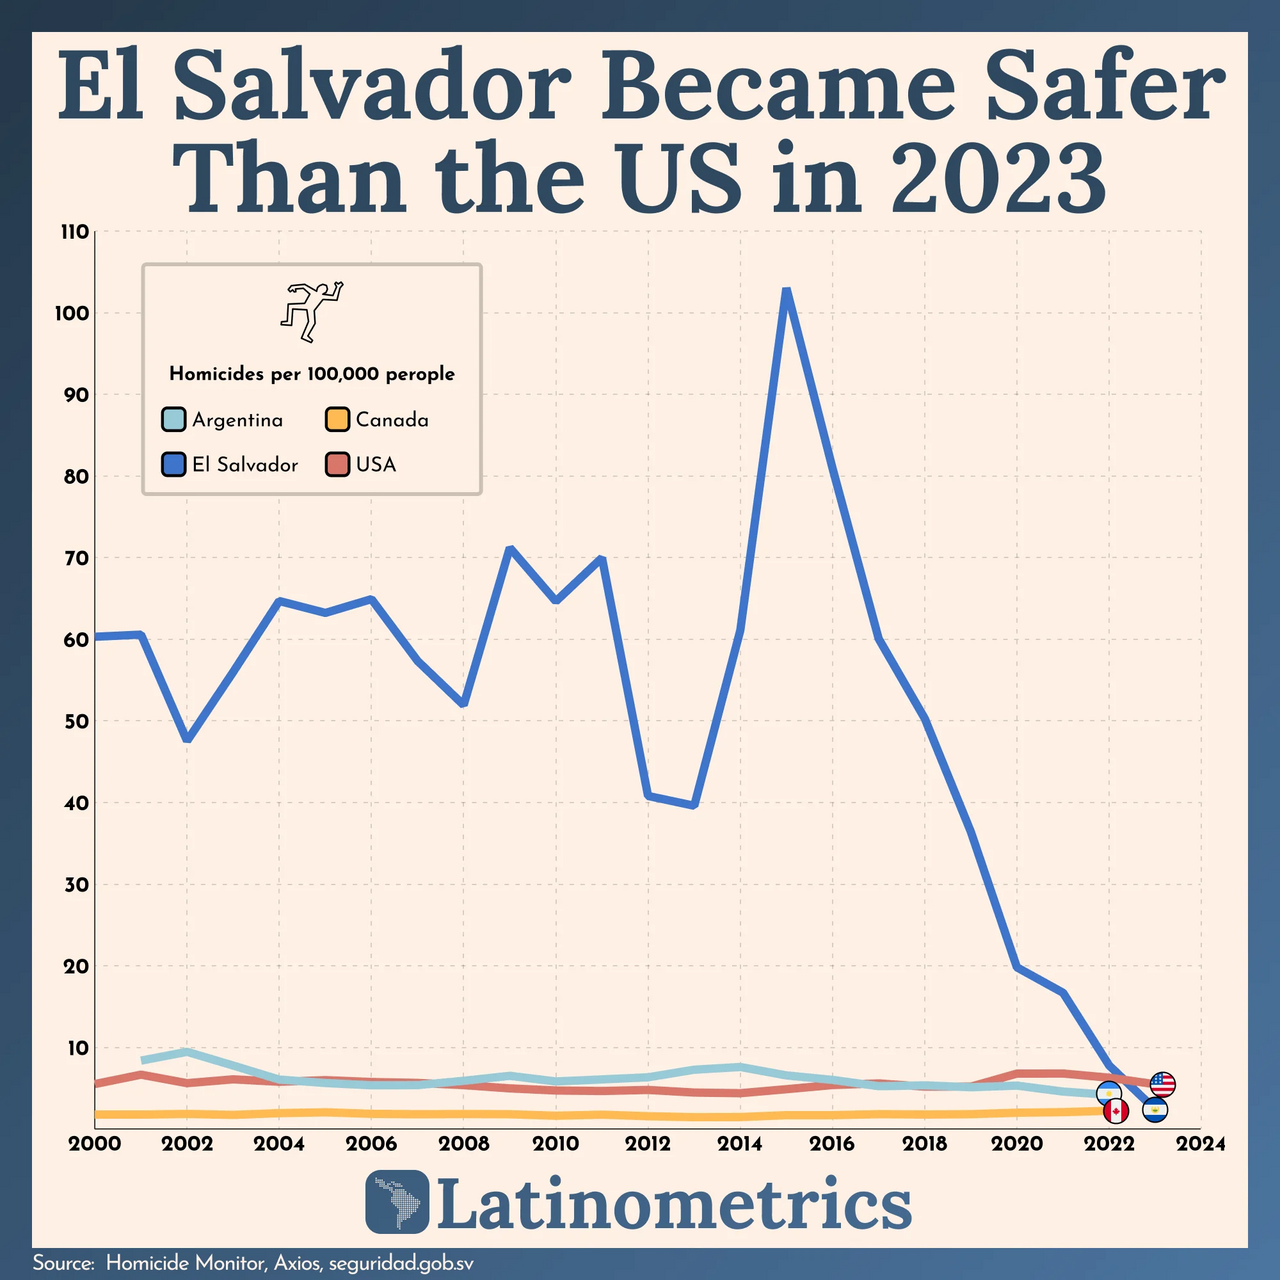 El Salvador's murder rate is now the lowest among Latin American countries (Photo - Latinometrics)